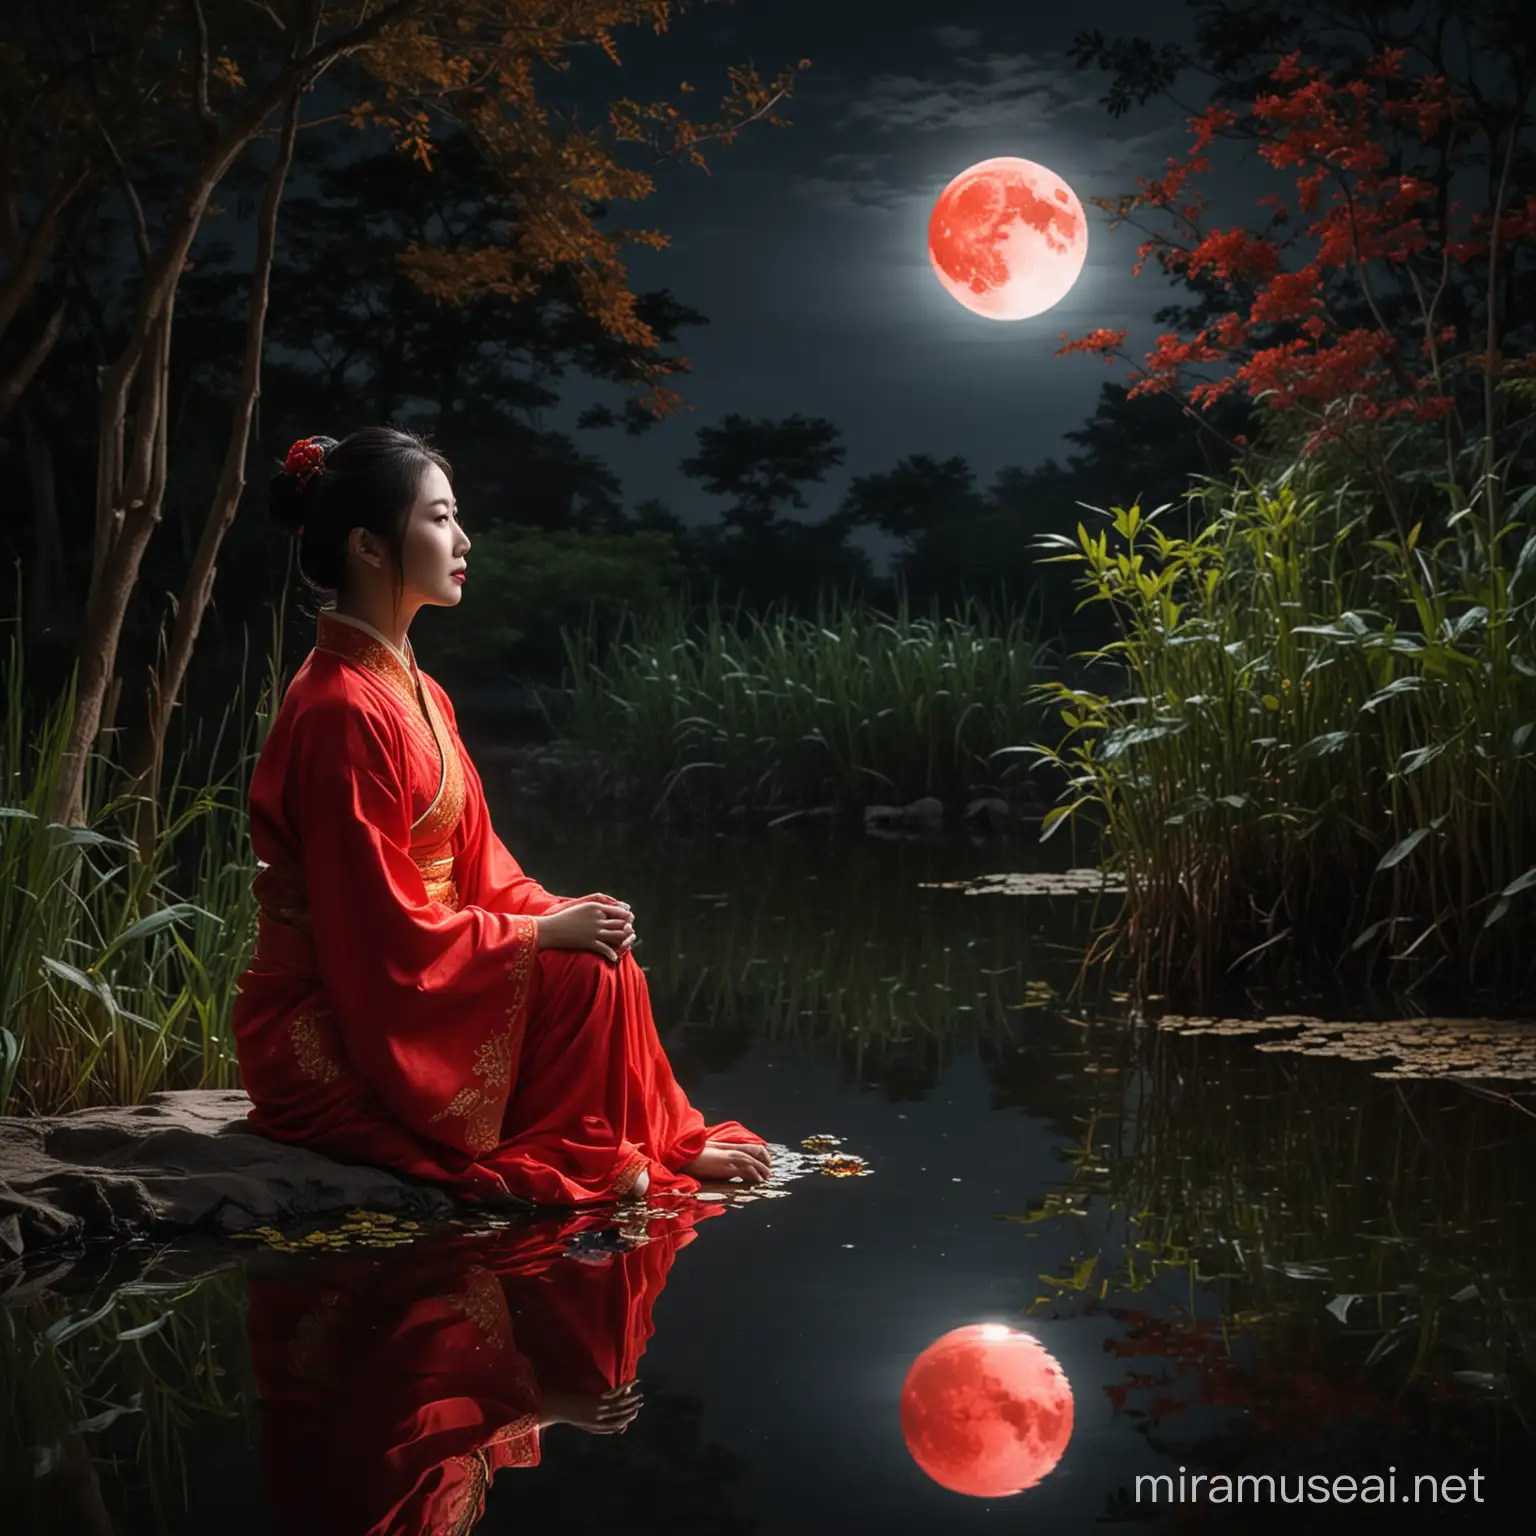 There is a beautiful Chinese woman in red. The Chinese woman is in the pond on a dark night. The bright moon shines on the pond. The Chinese woman sits and looks at the pond. The Chinese woman's face is reflected in the pond.